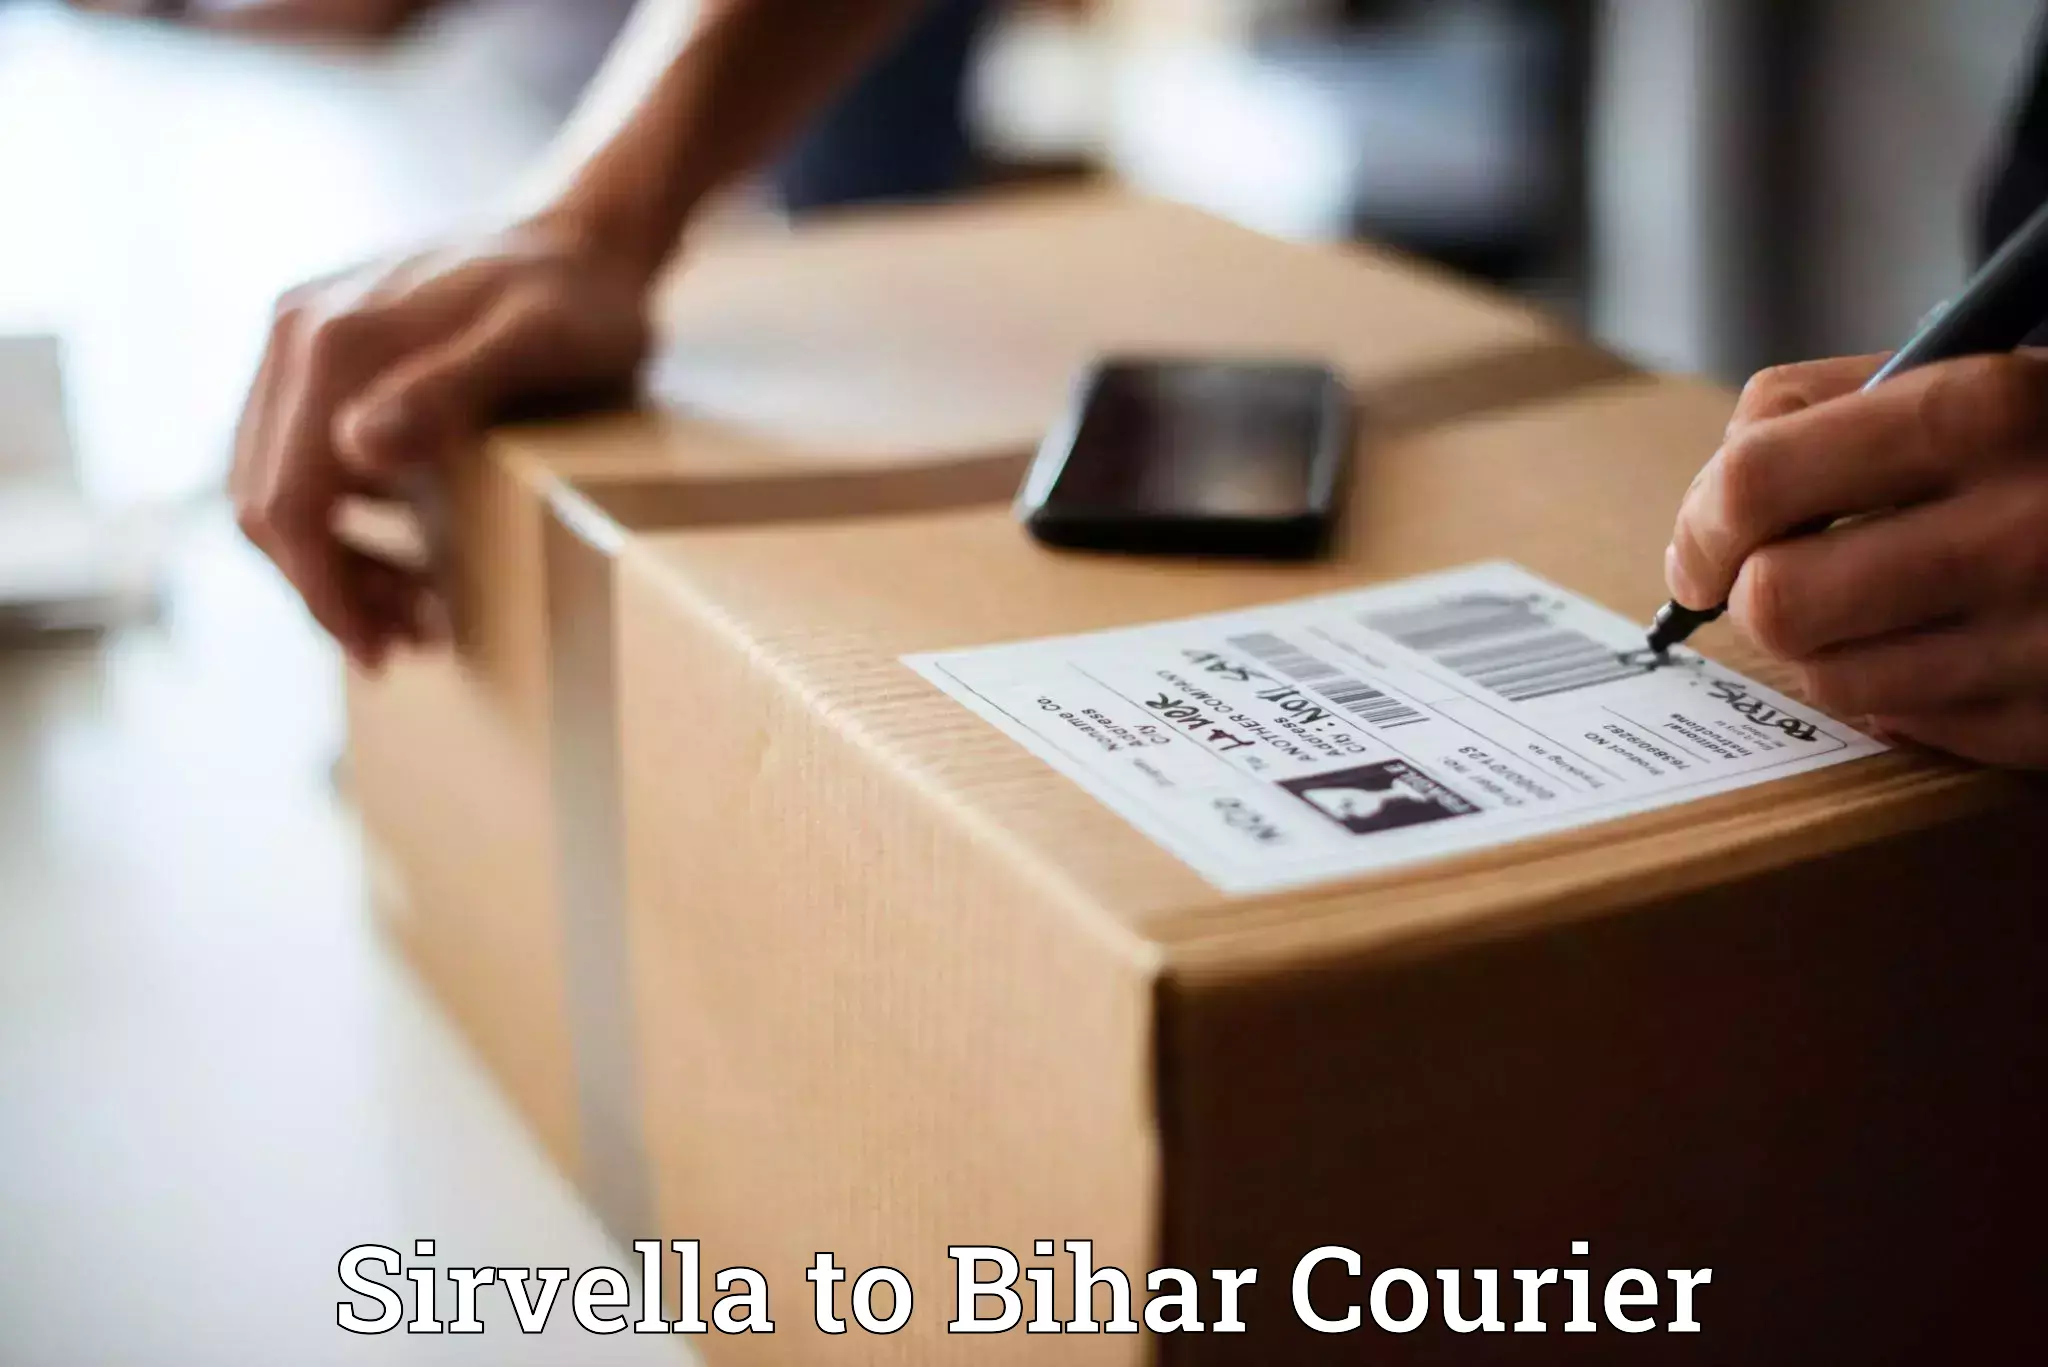 Reliable parcel services Sirvella to Bihta